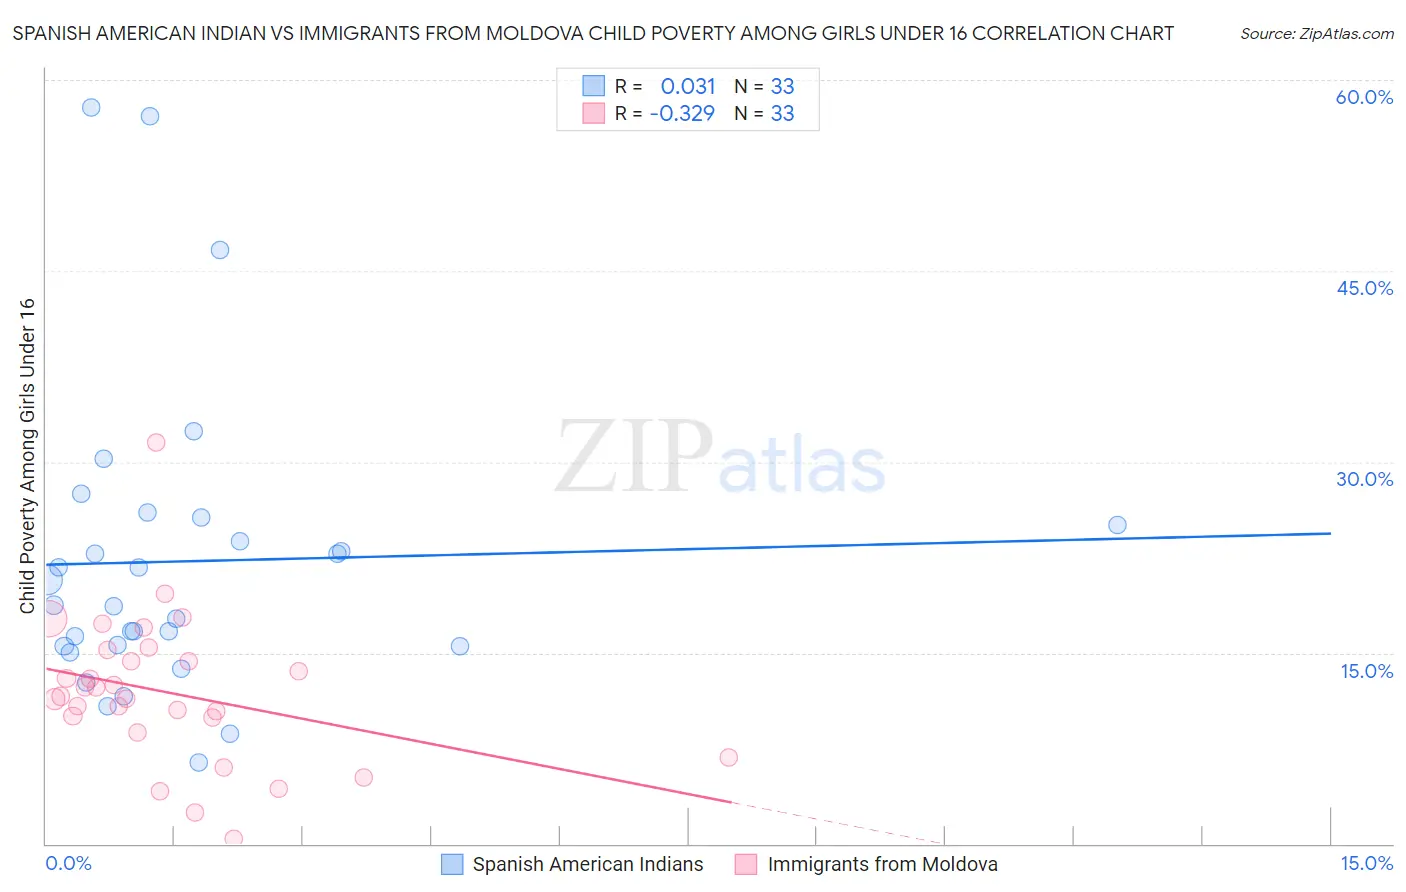 Spanish American Indian vs Immigrants from Moldova Child Poverty Among Girls Under 16